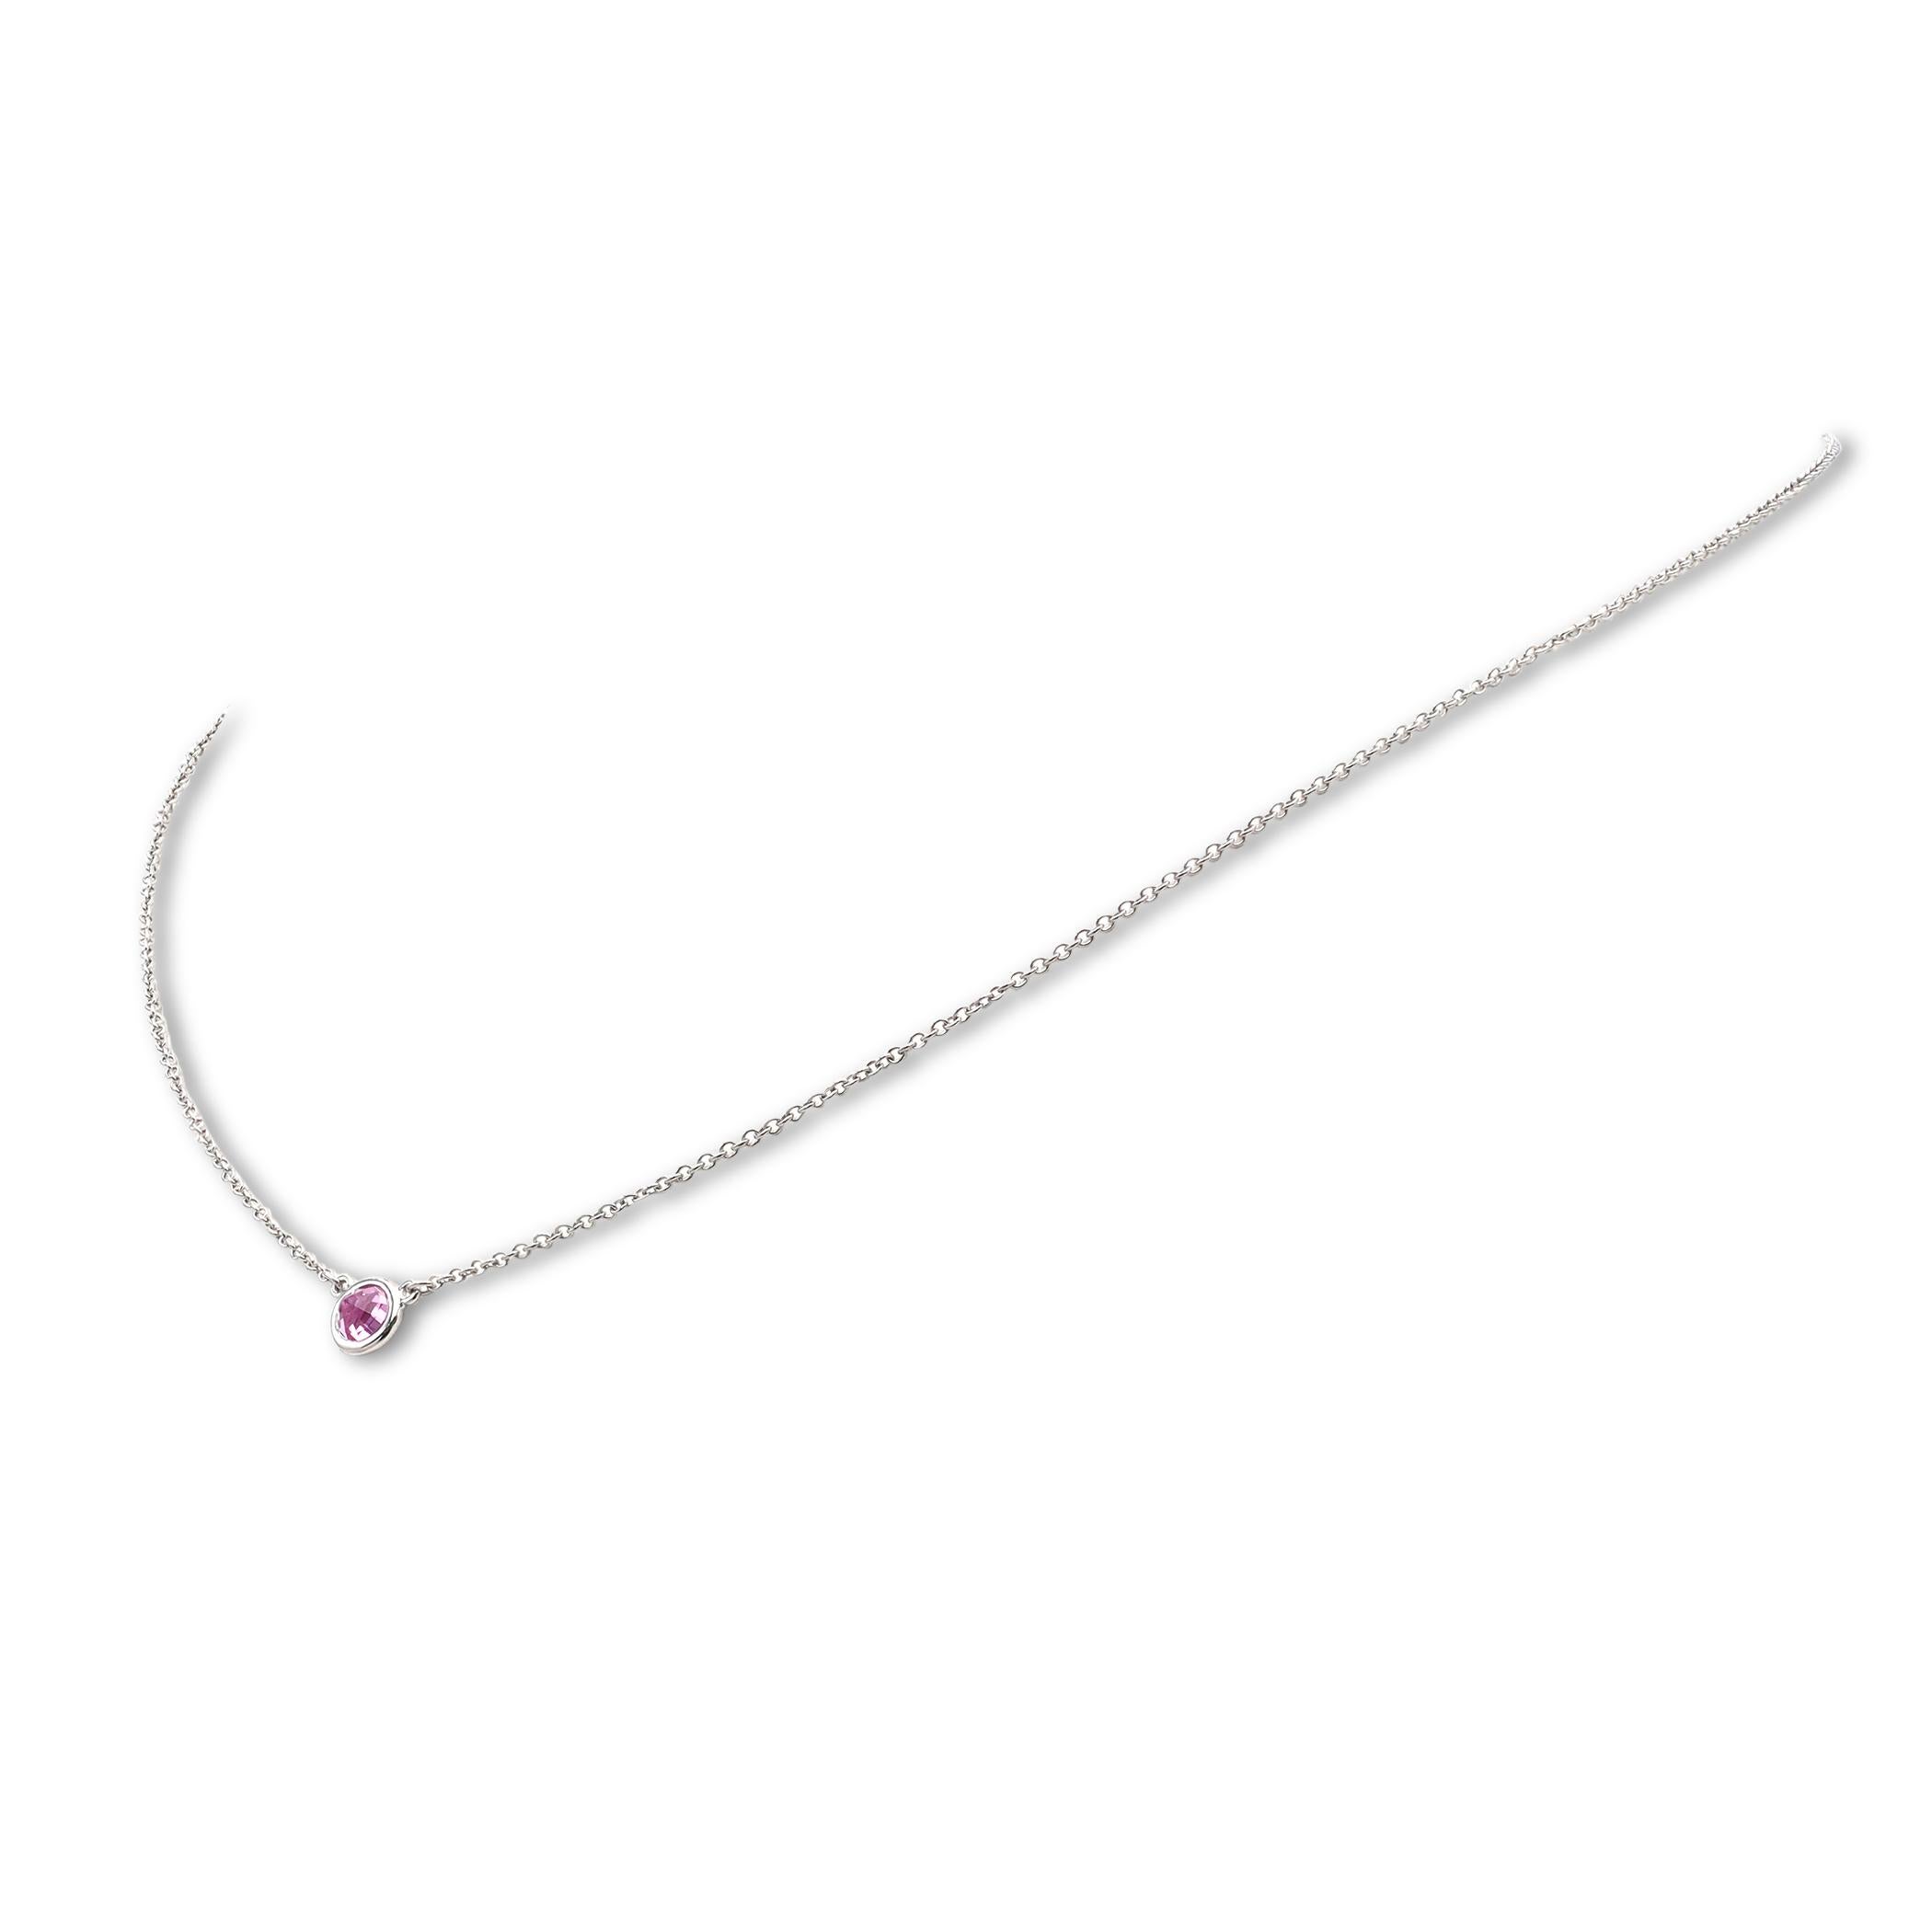 Authentic Elsa Peretti for Tiffany & Co. 'Color by the Yard' necklace crafted in platinum and featuring a single round brilliant cut pink sapphire. The chain measures 16 1/2 inches in length. Signed Elsa Peretti, Tiffany & Co., PT950. Necklace is